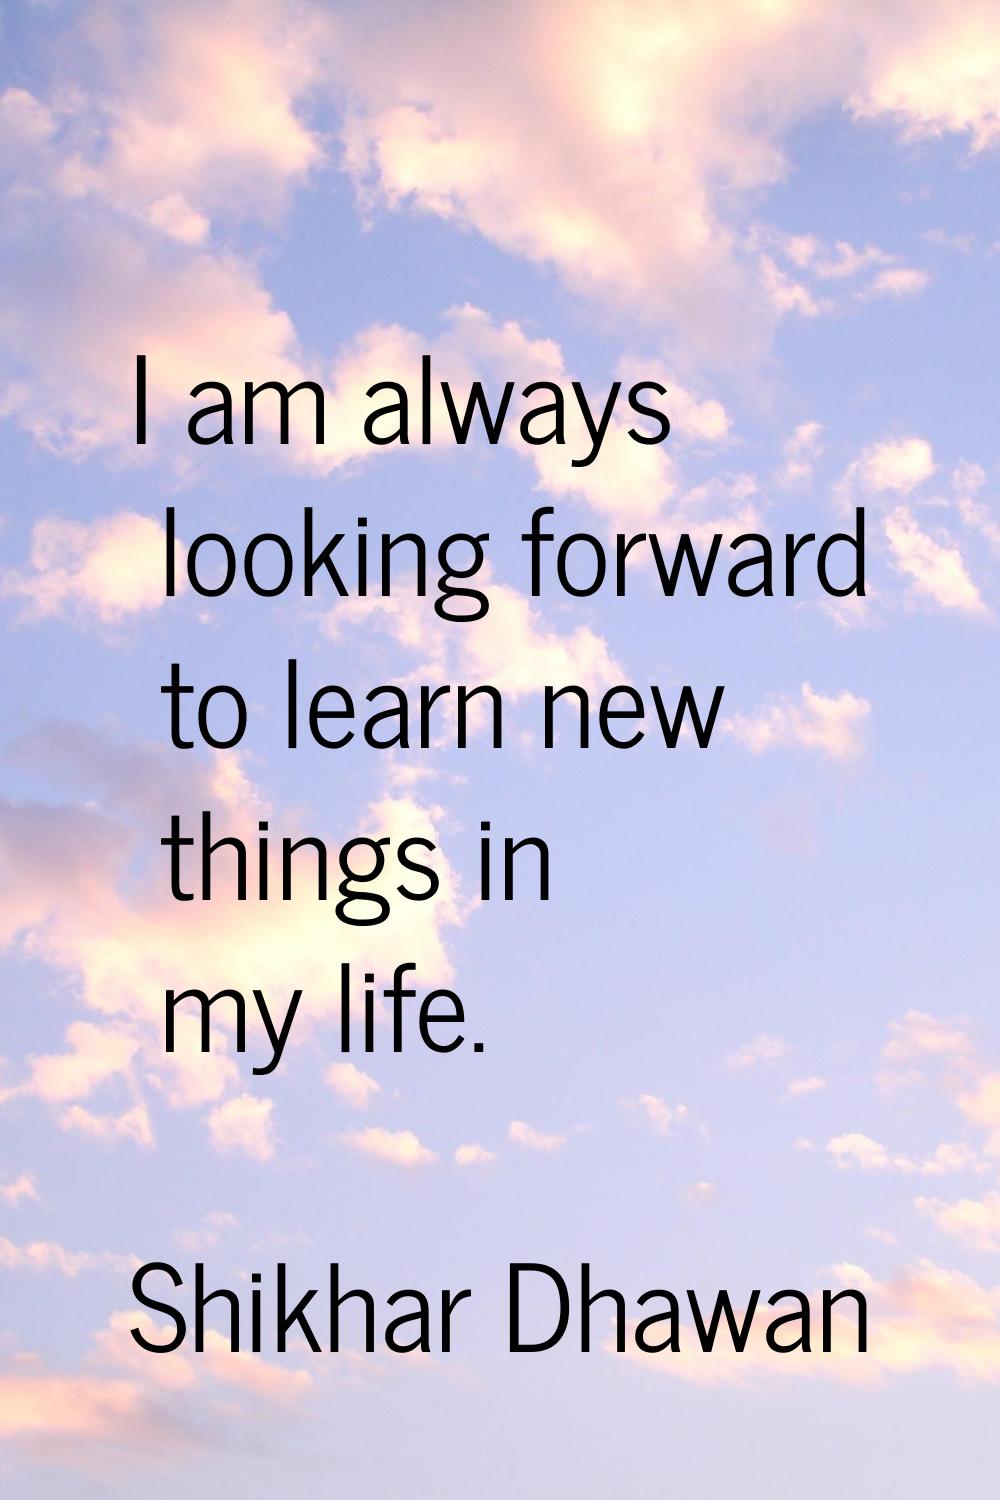 I am always looking forward to learn new things in my life.